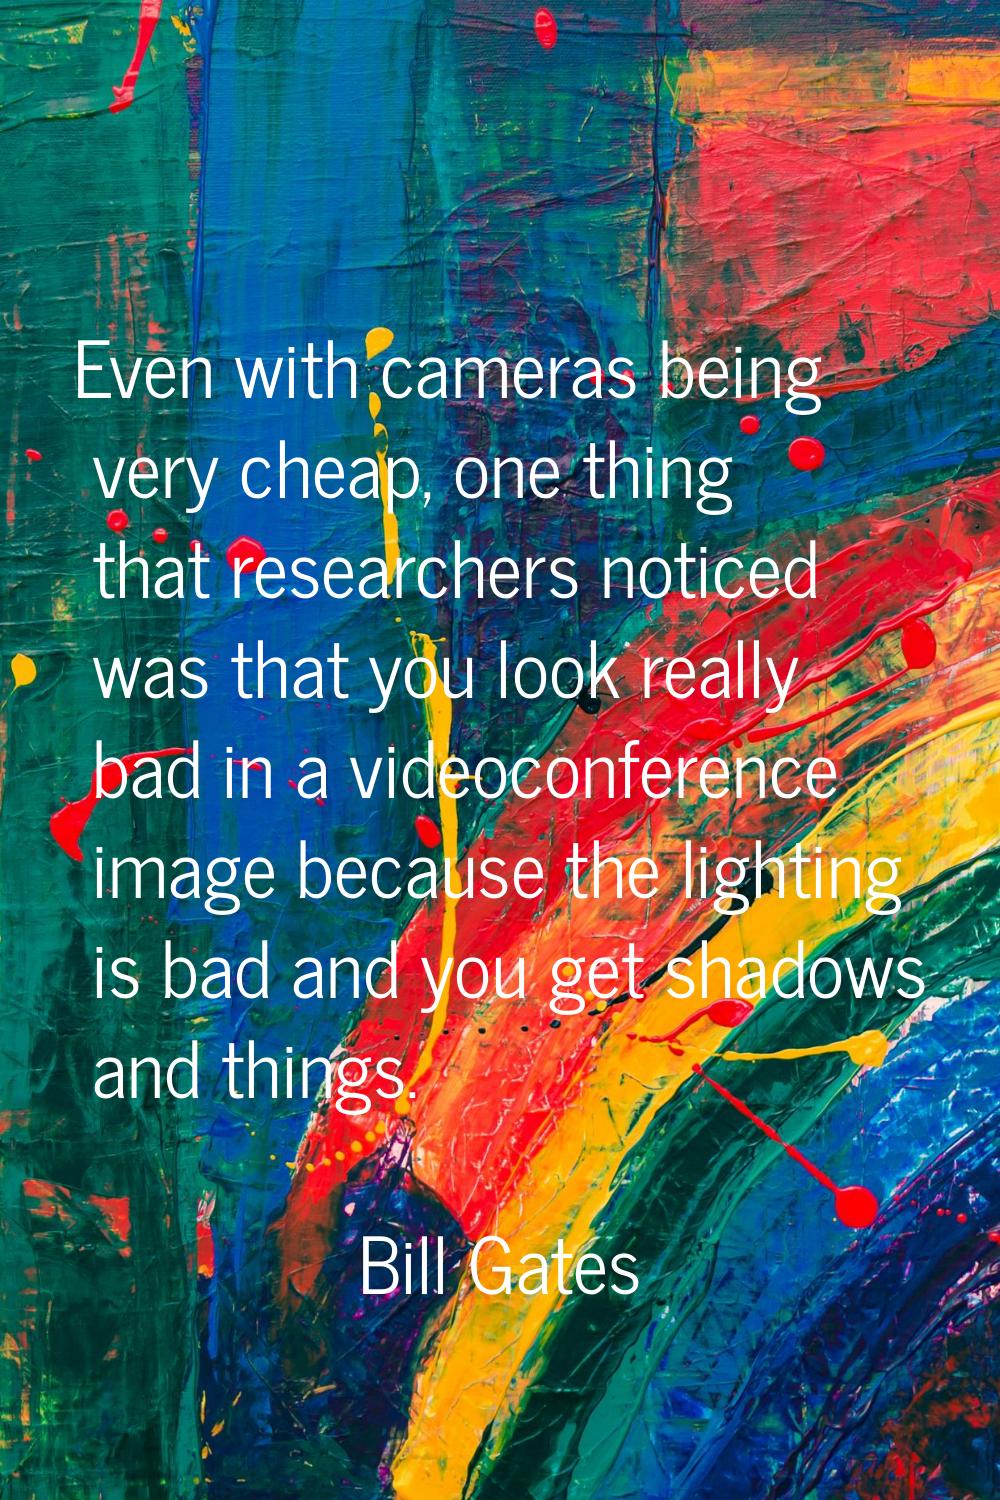 Even with cameras being very cheap, one thing that researchers noticed was that you look really bad